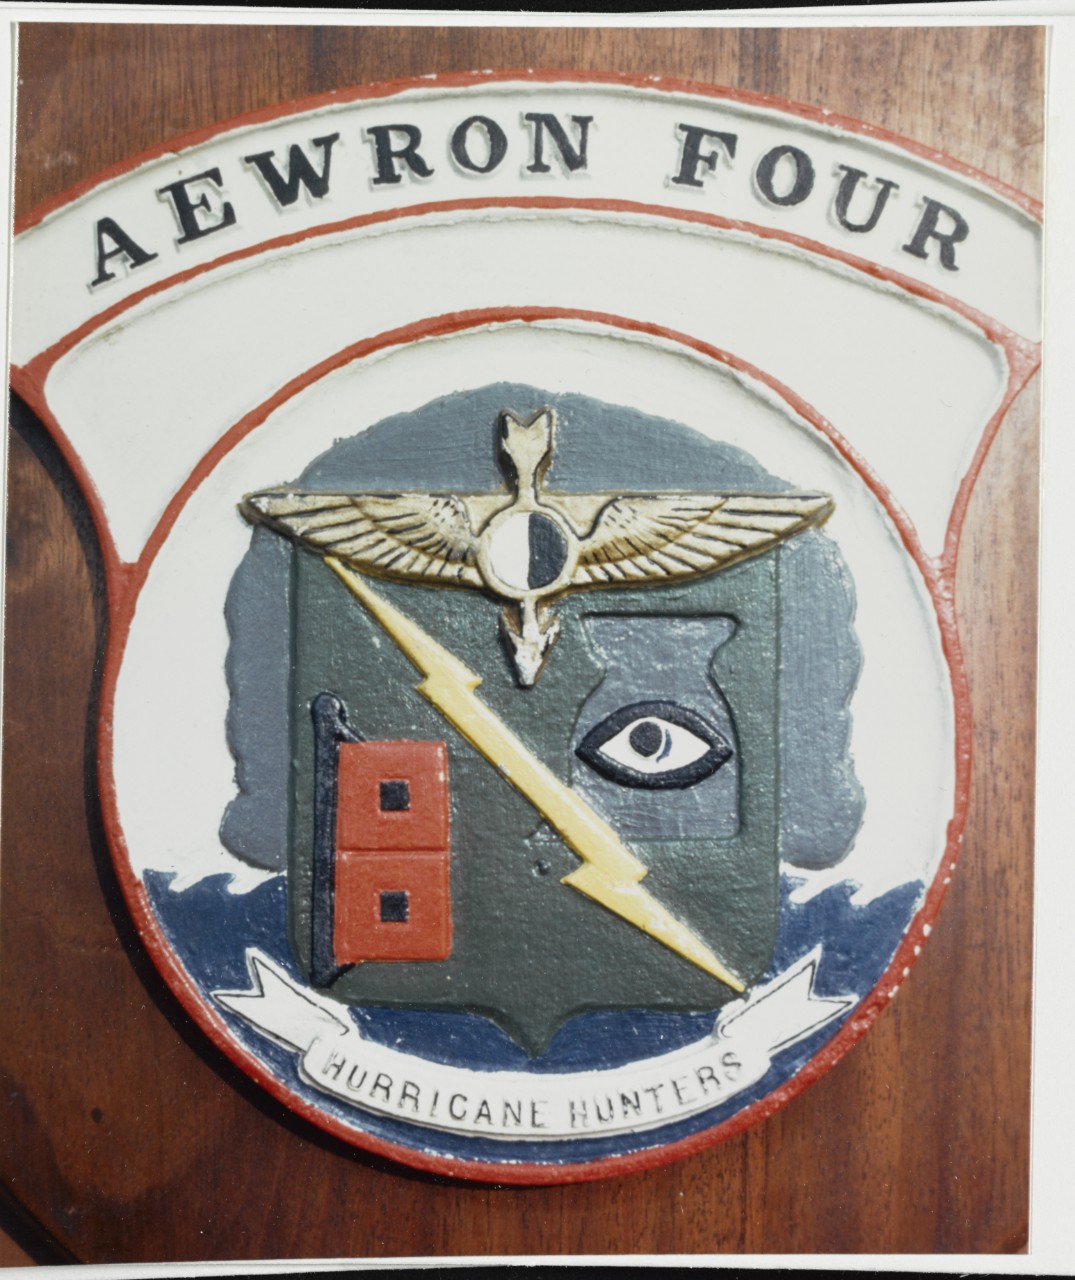 Insignia: Airborne Early Warning Squadron Four. Emblem of 1950s or 1960s vintage of the Navy's "Hurricane Hunters".